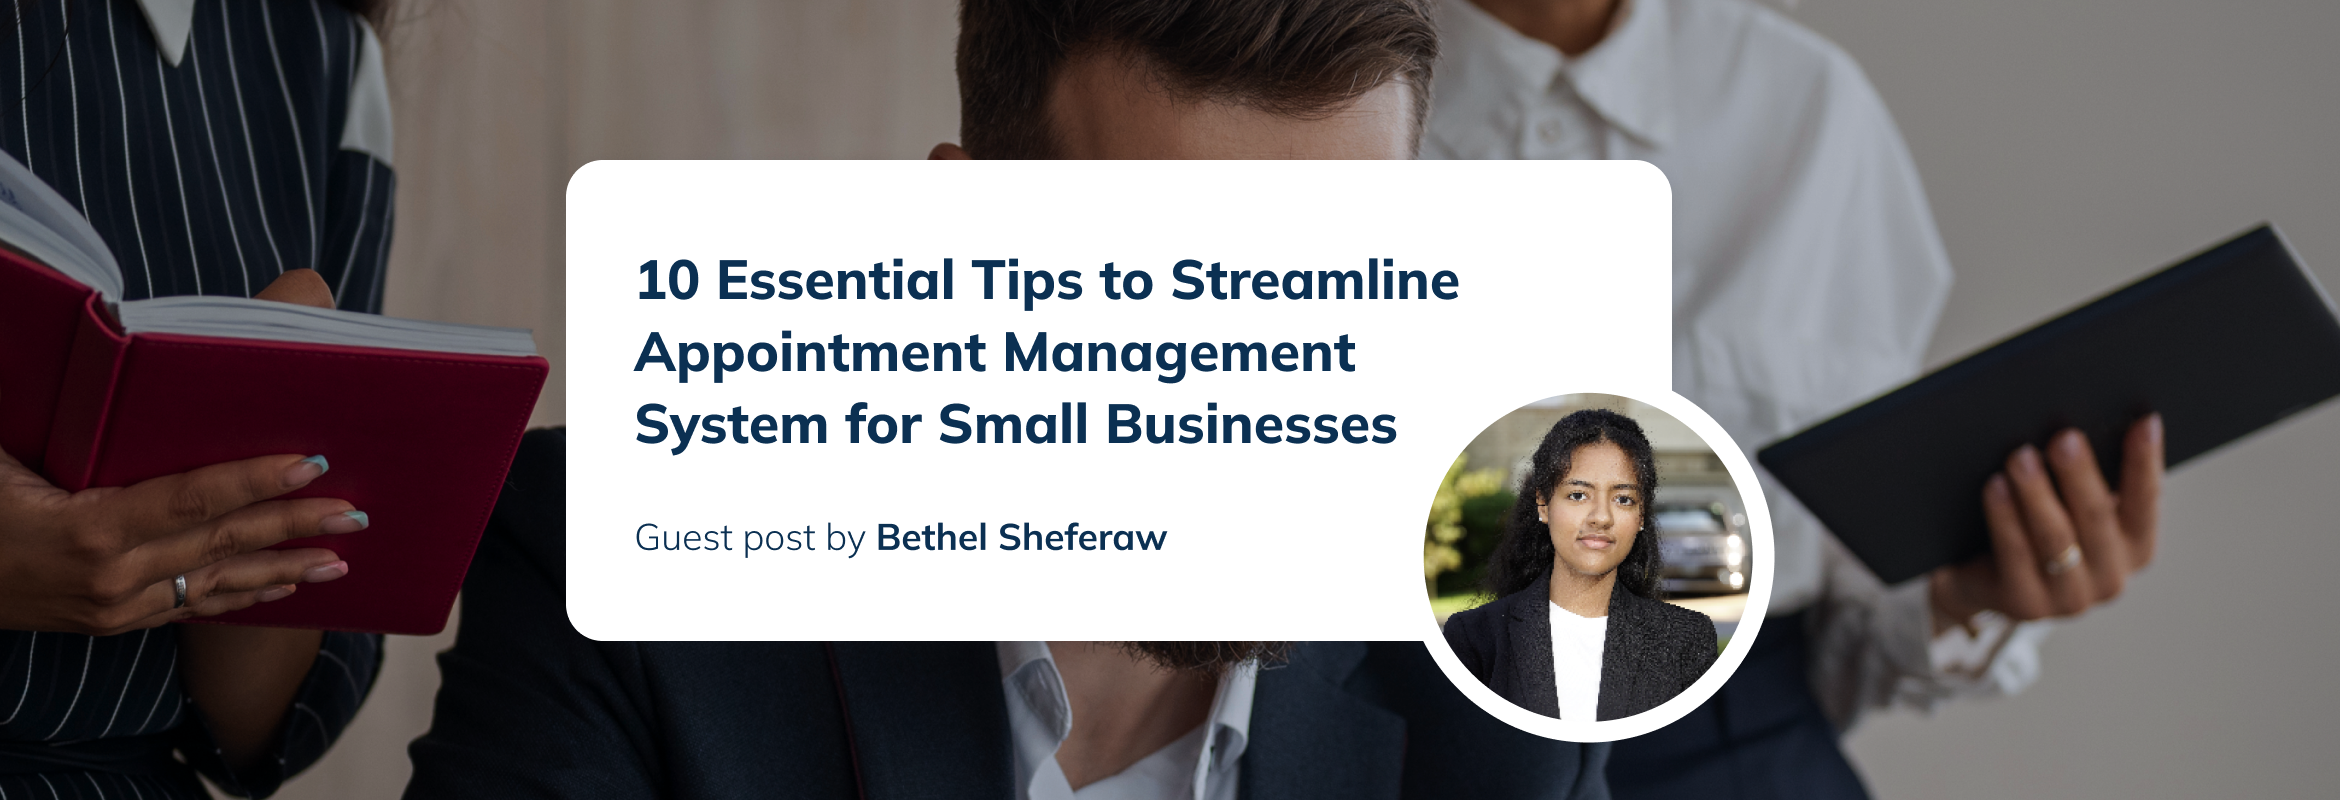 10 Essential Tips to Streamline Appointment Management System for Small Businesses